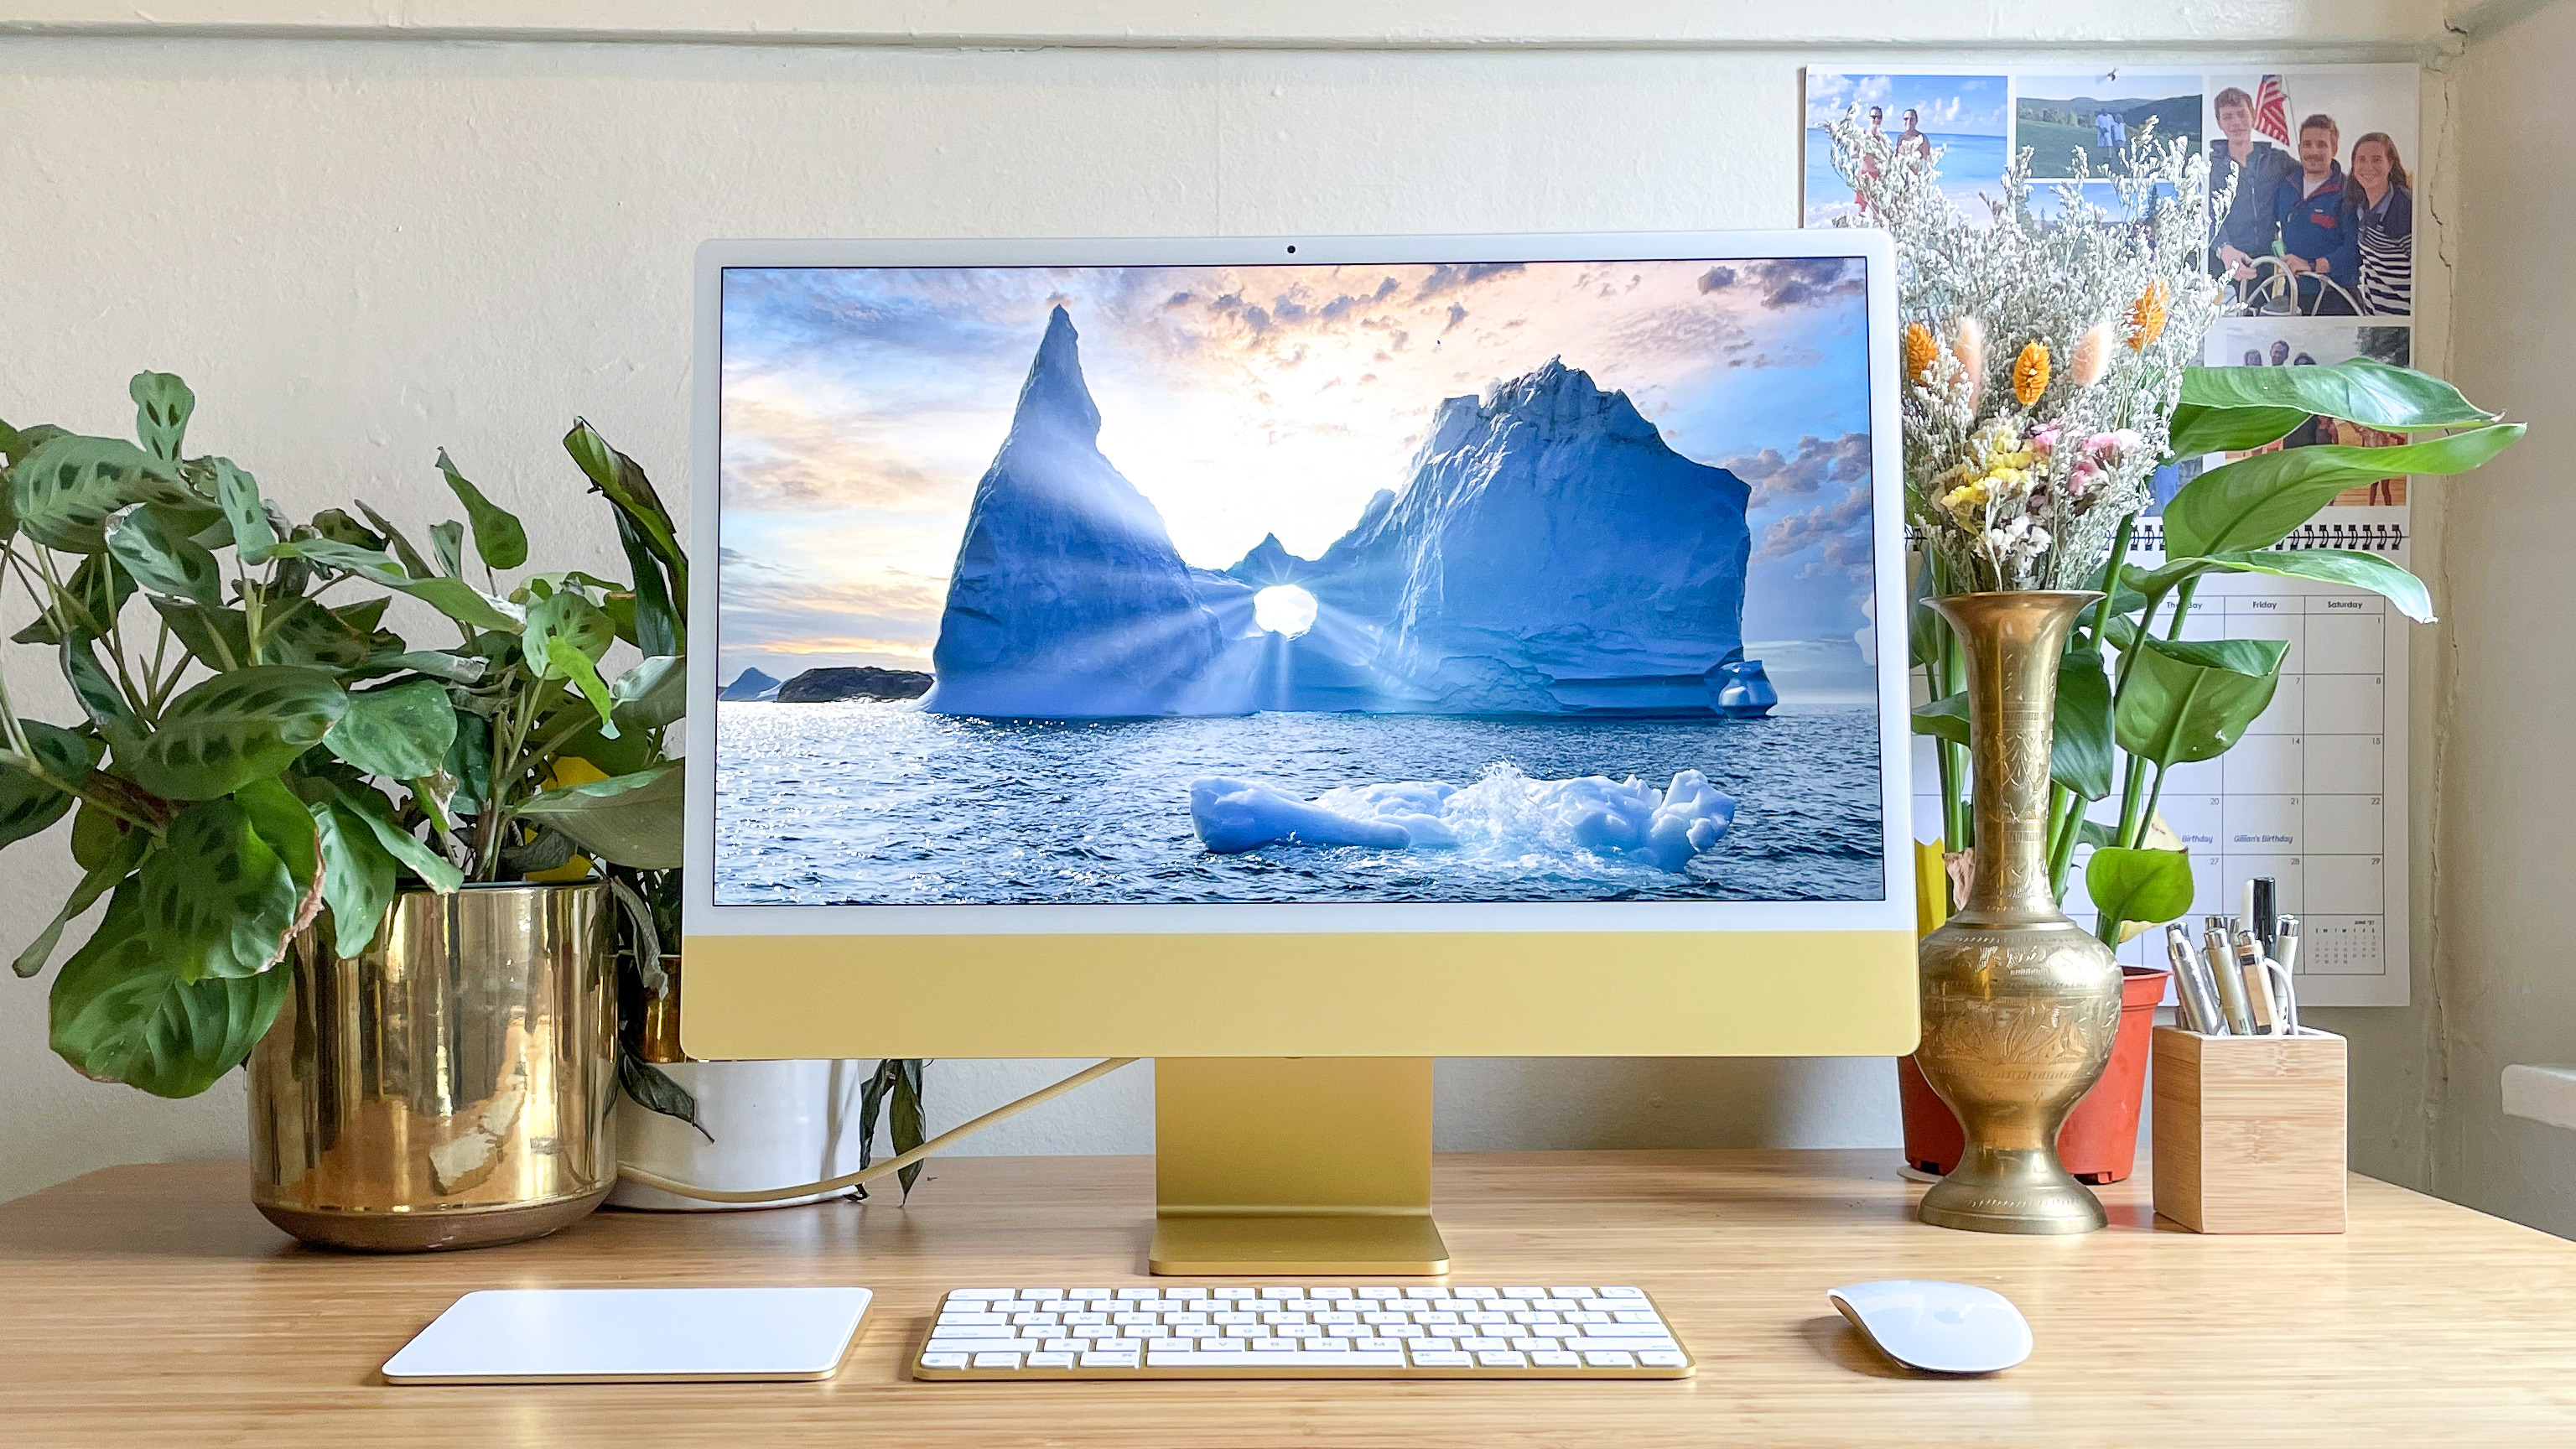 iMac with M3 chip reportedly being worked on for launch next year